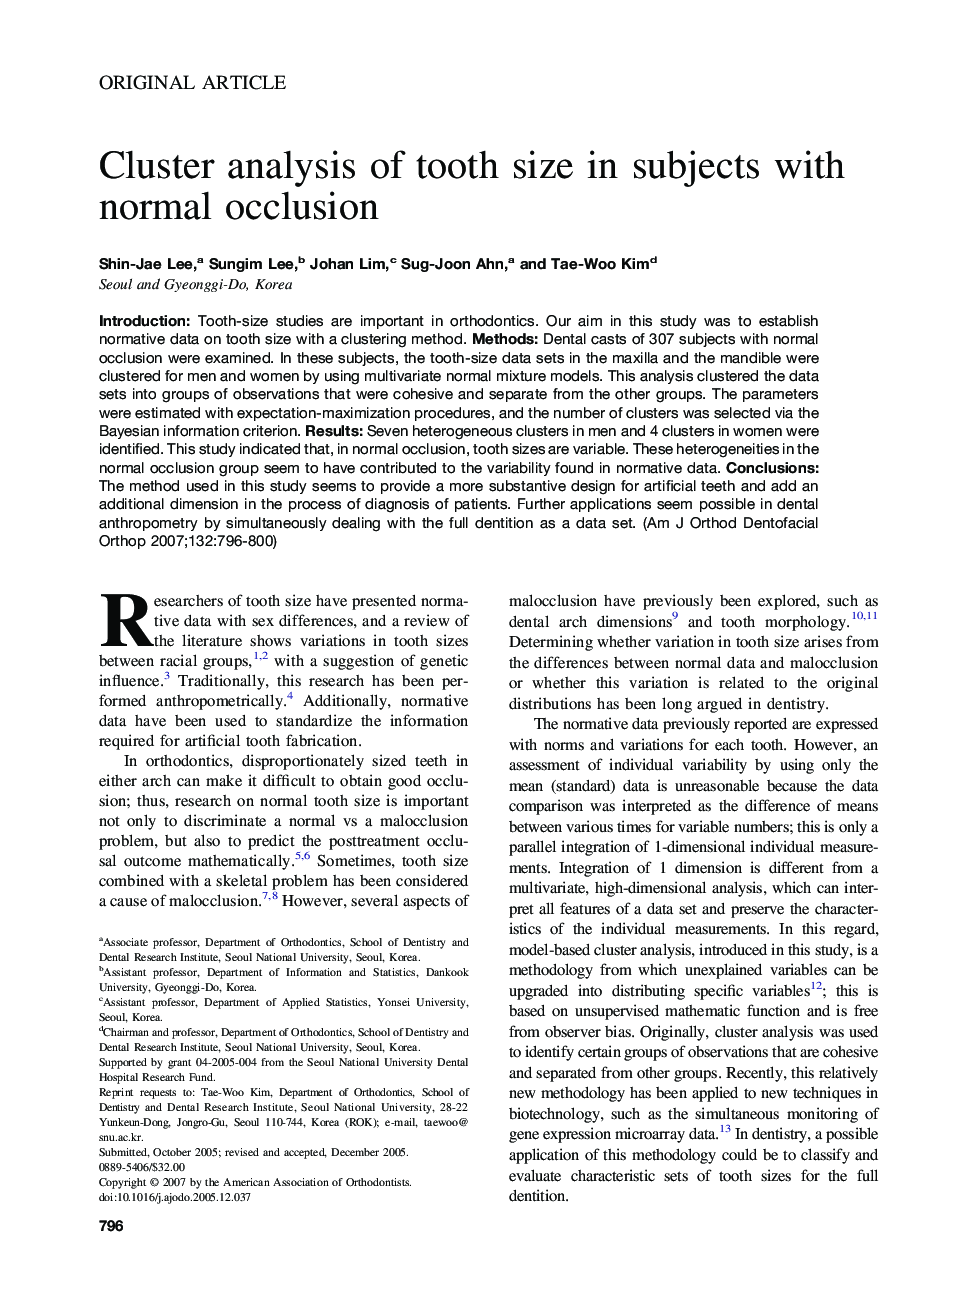 Cluster analysis of tooth size in subjects with normal occlusion 